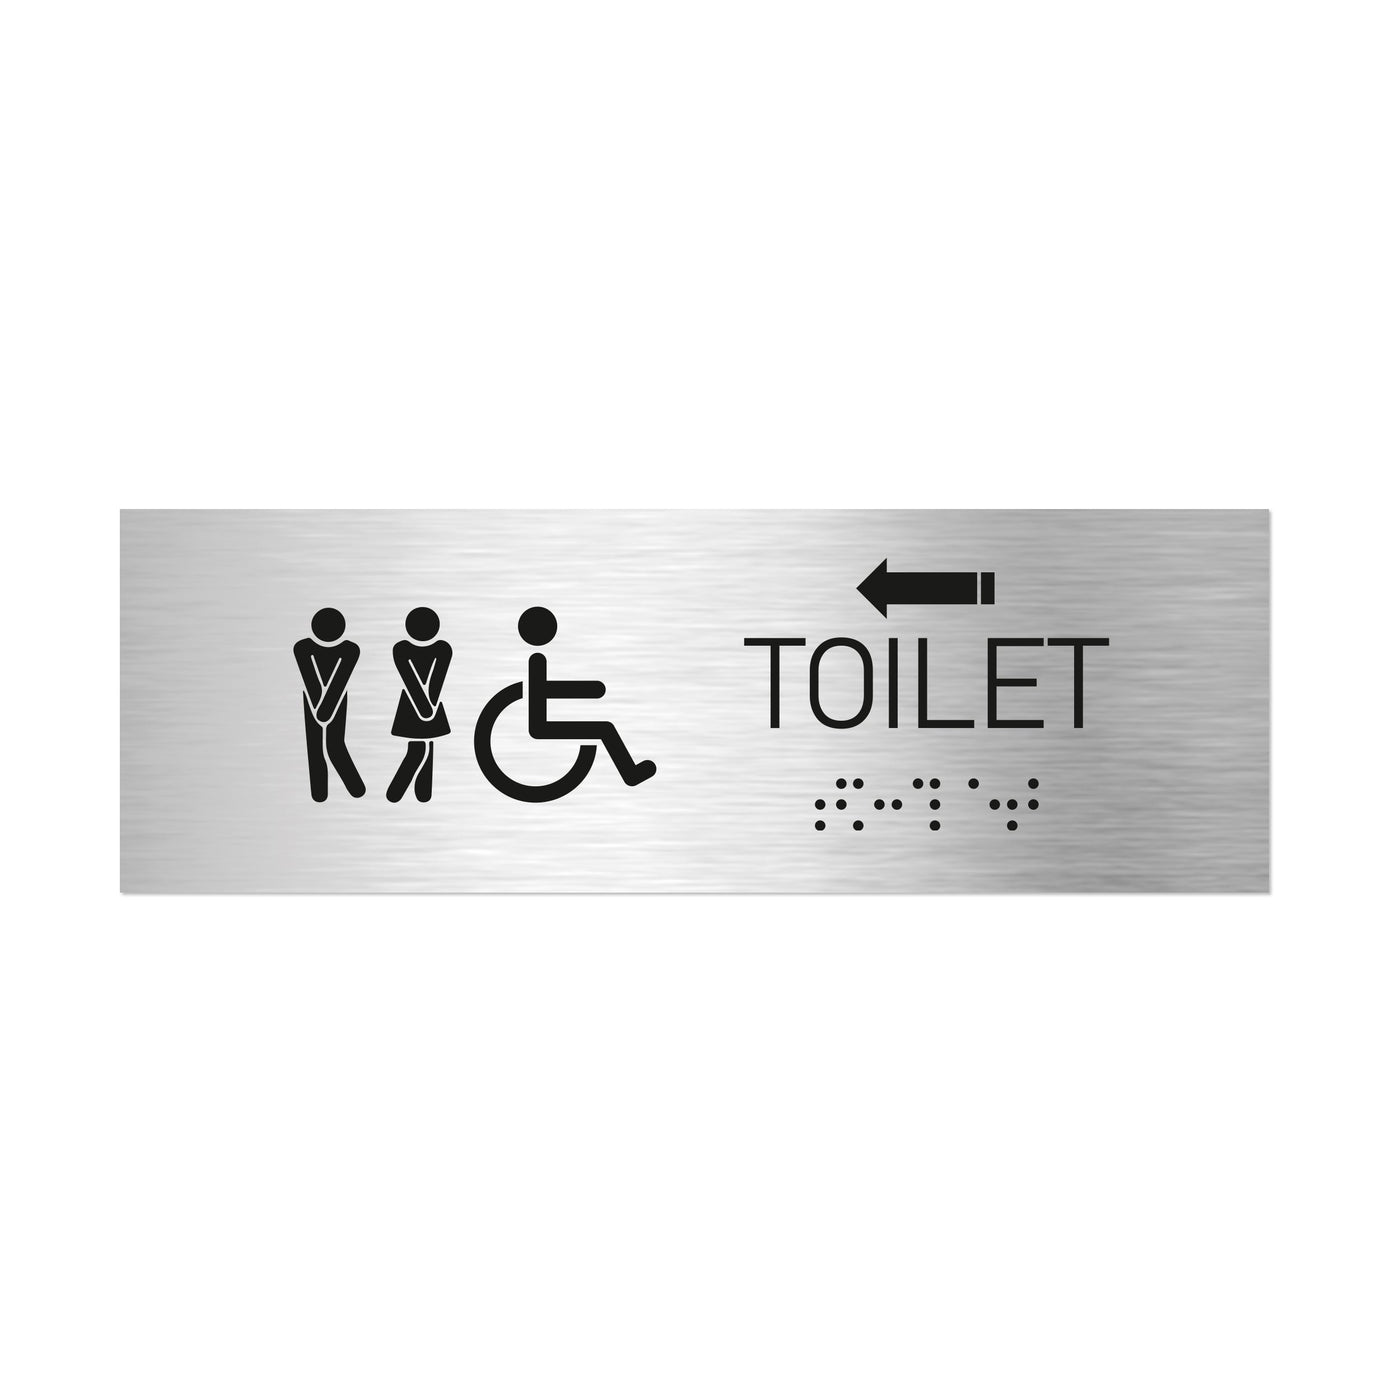 Bathroom Signs - All Gender With Weelchair Toilet Signs With Braille - Stainless Steel